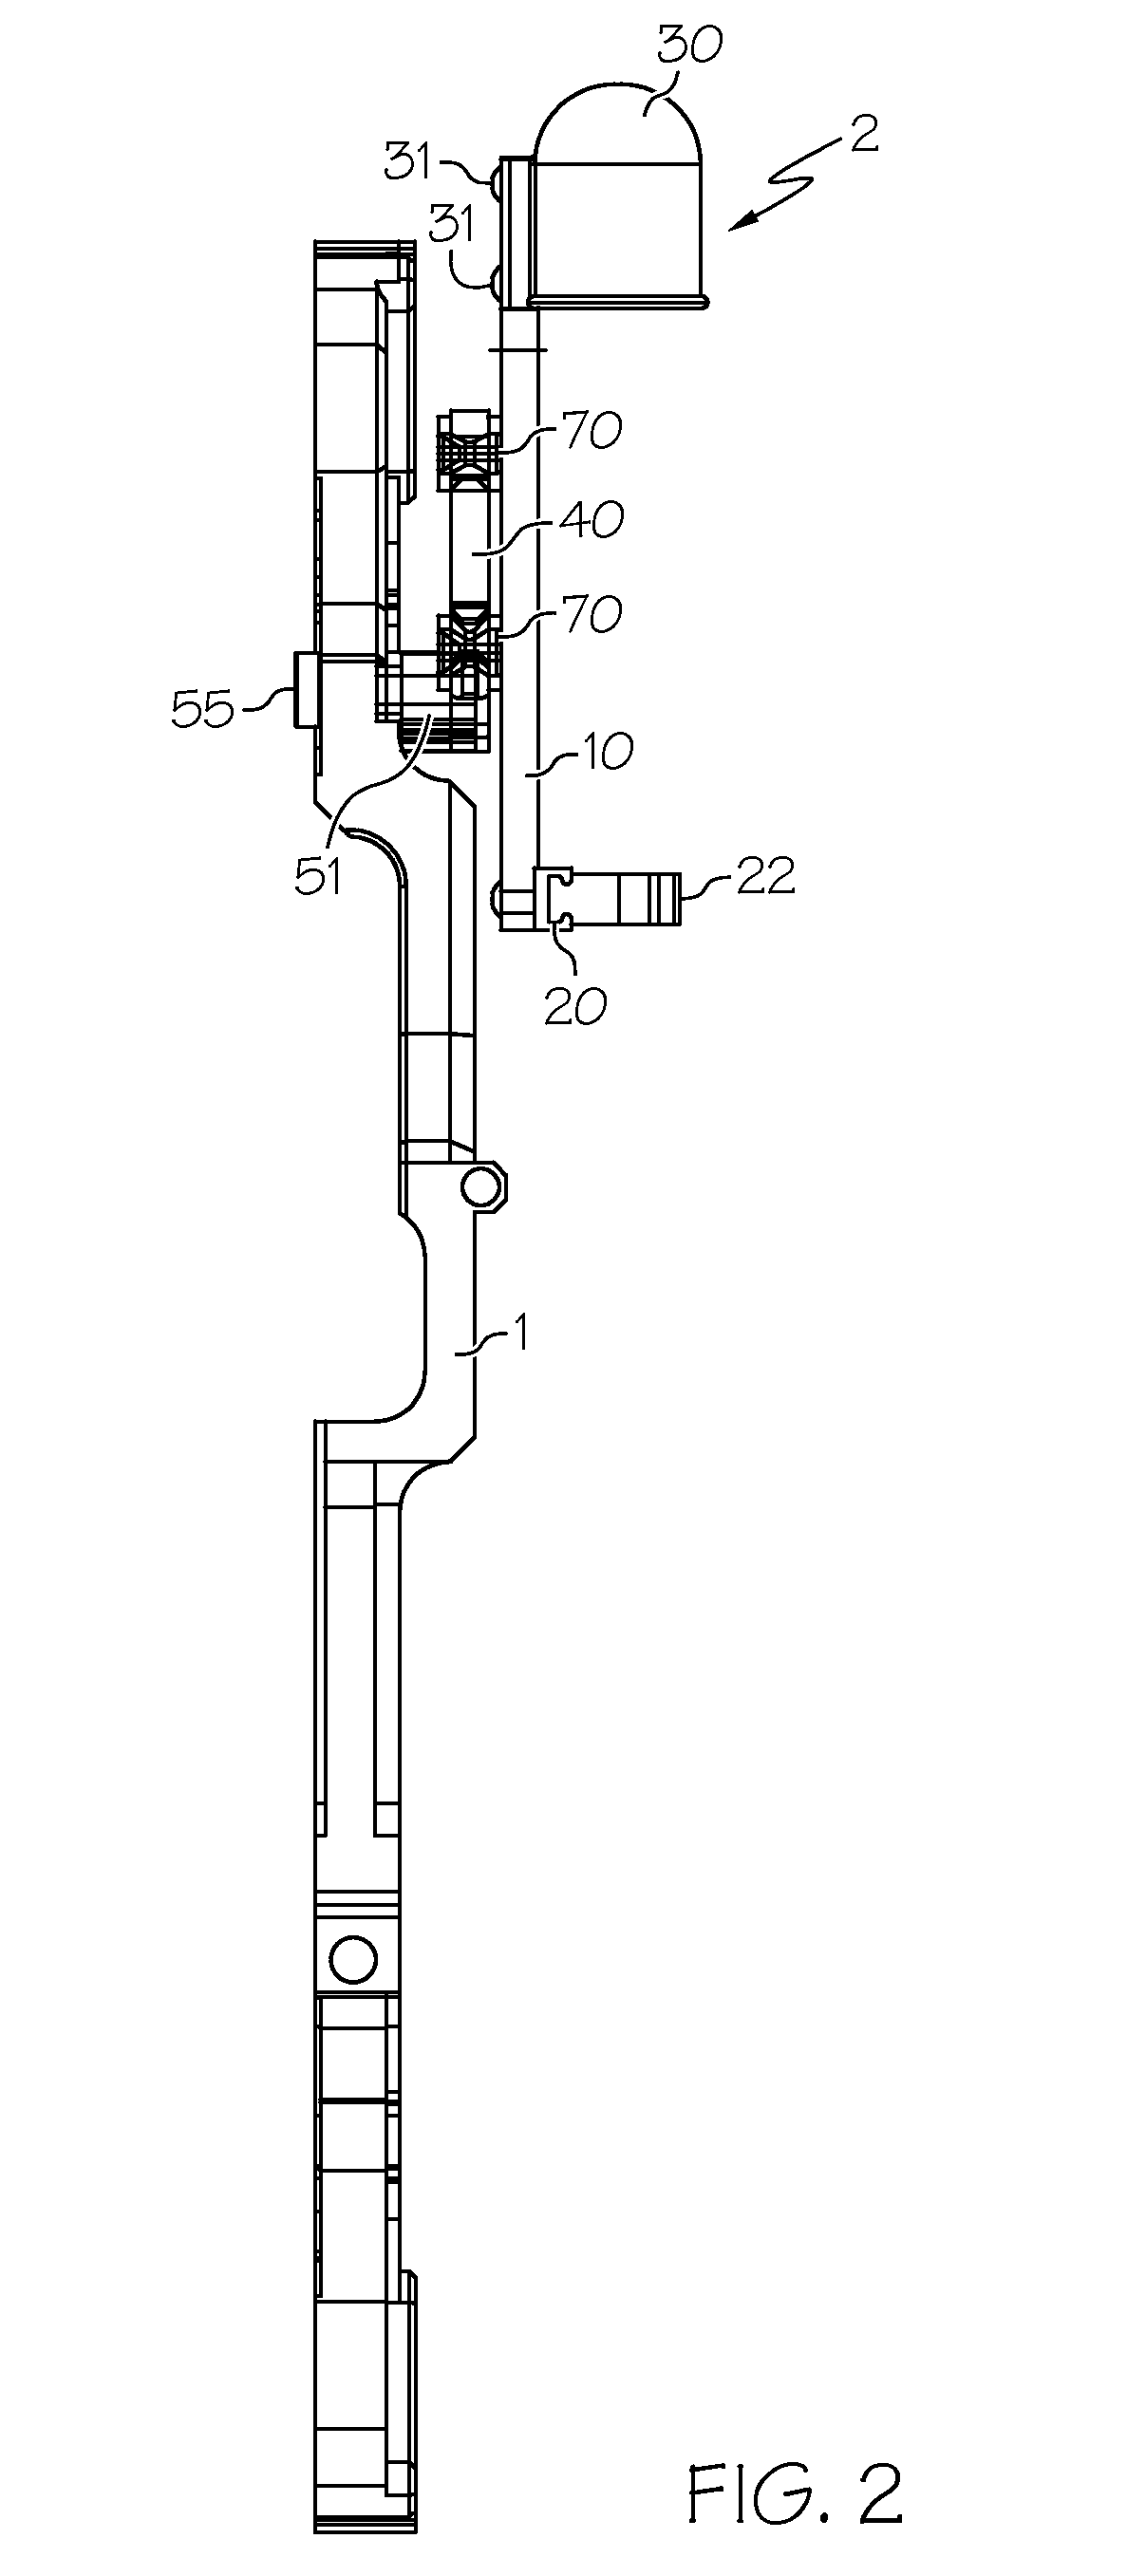 Apparatus and method for releasably mounting an accessory to an object such as for releasably mounting an arrow quiver to an archery bow